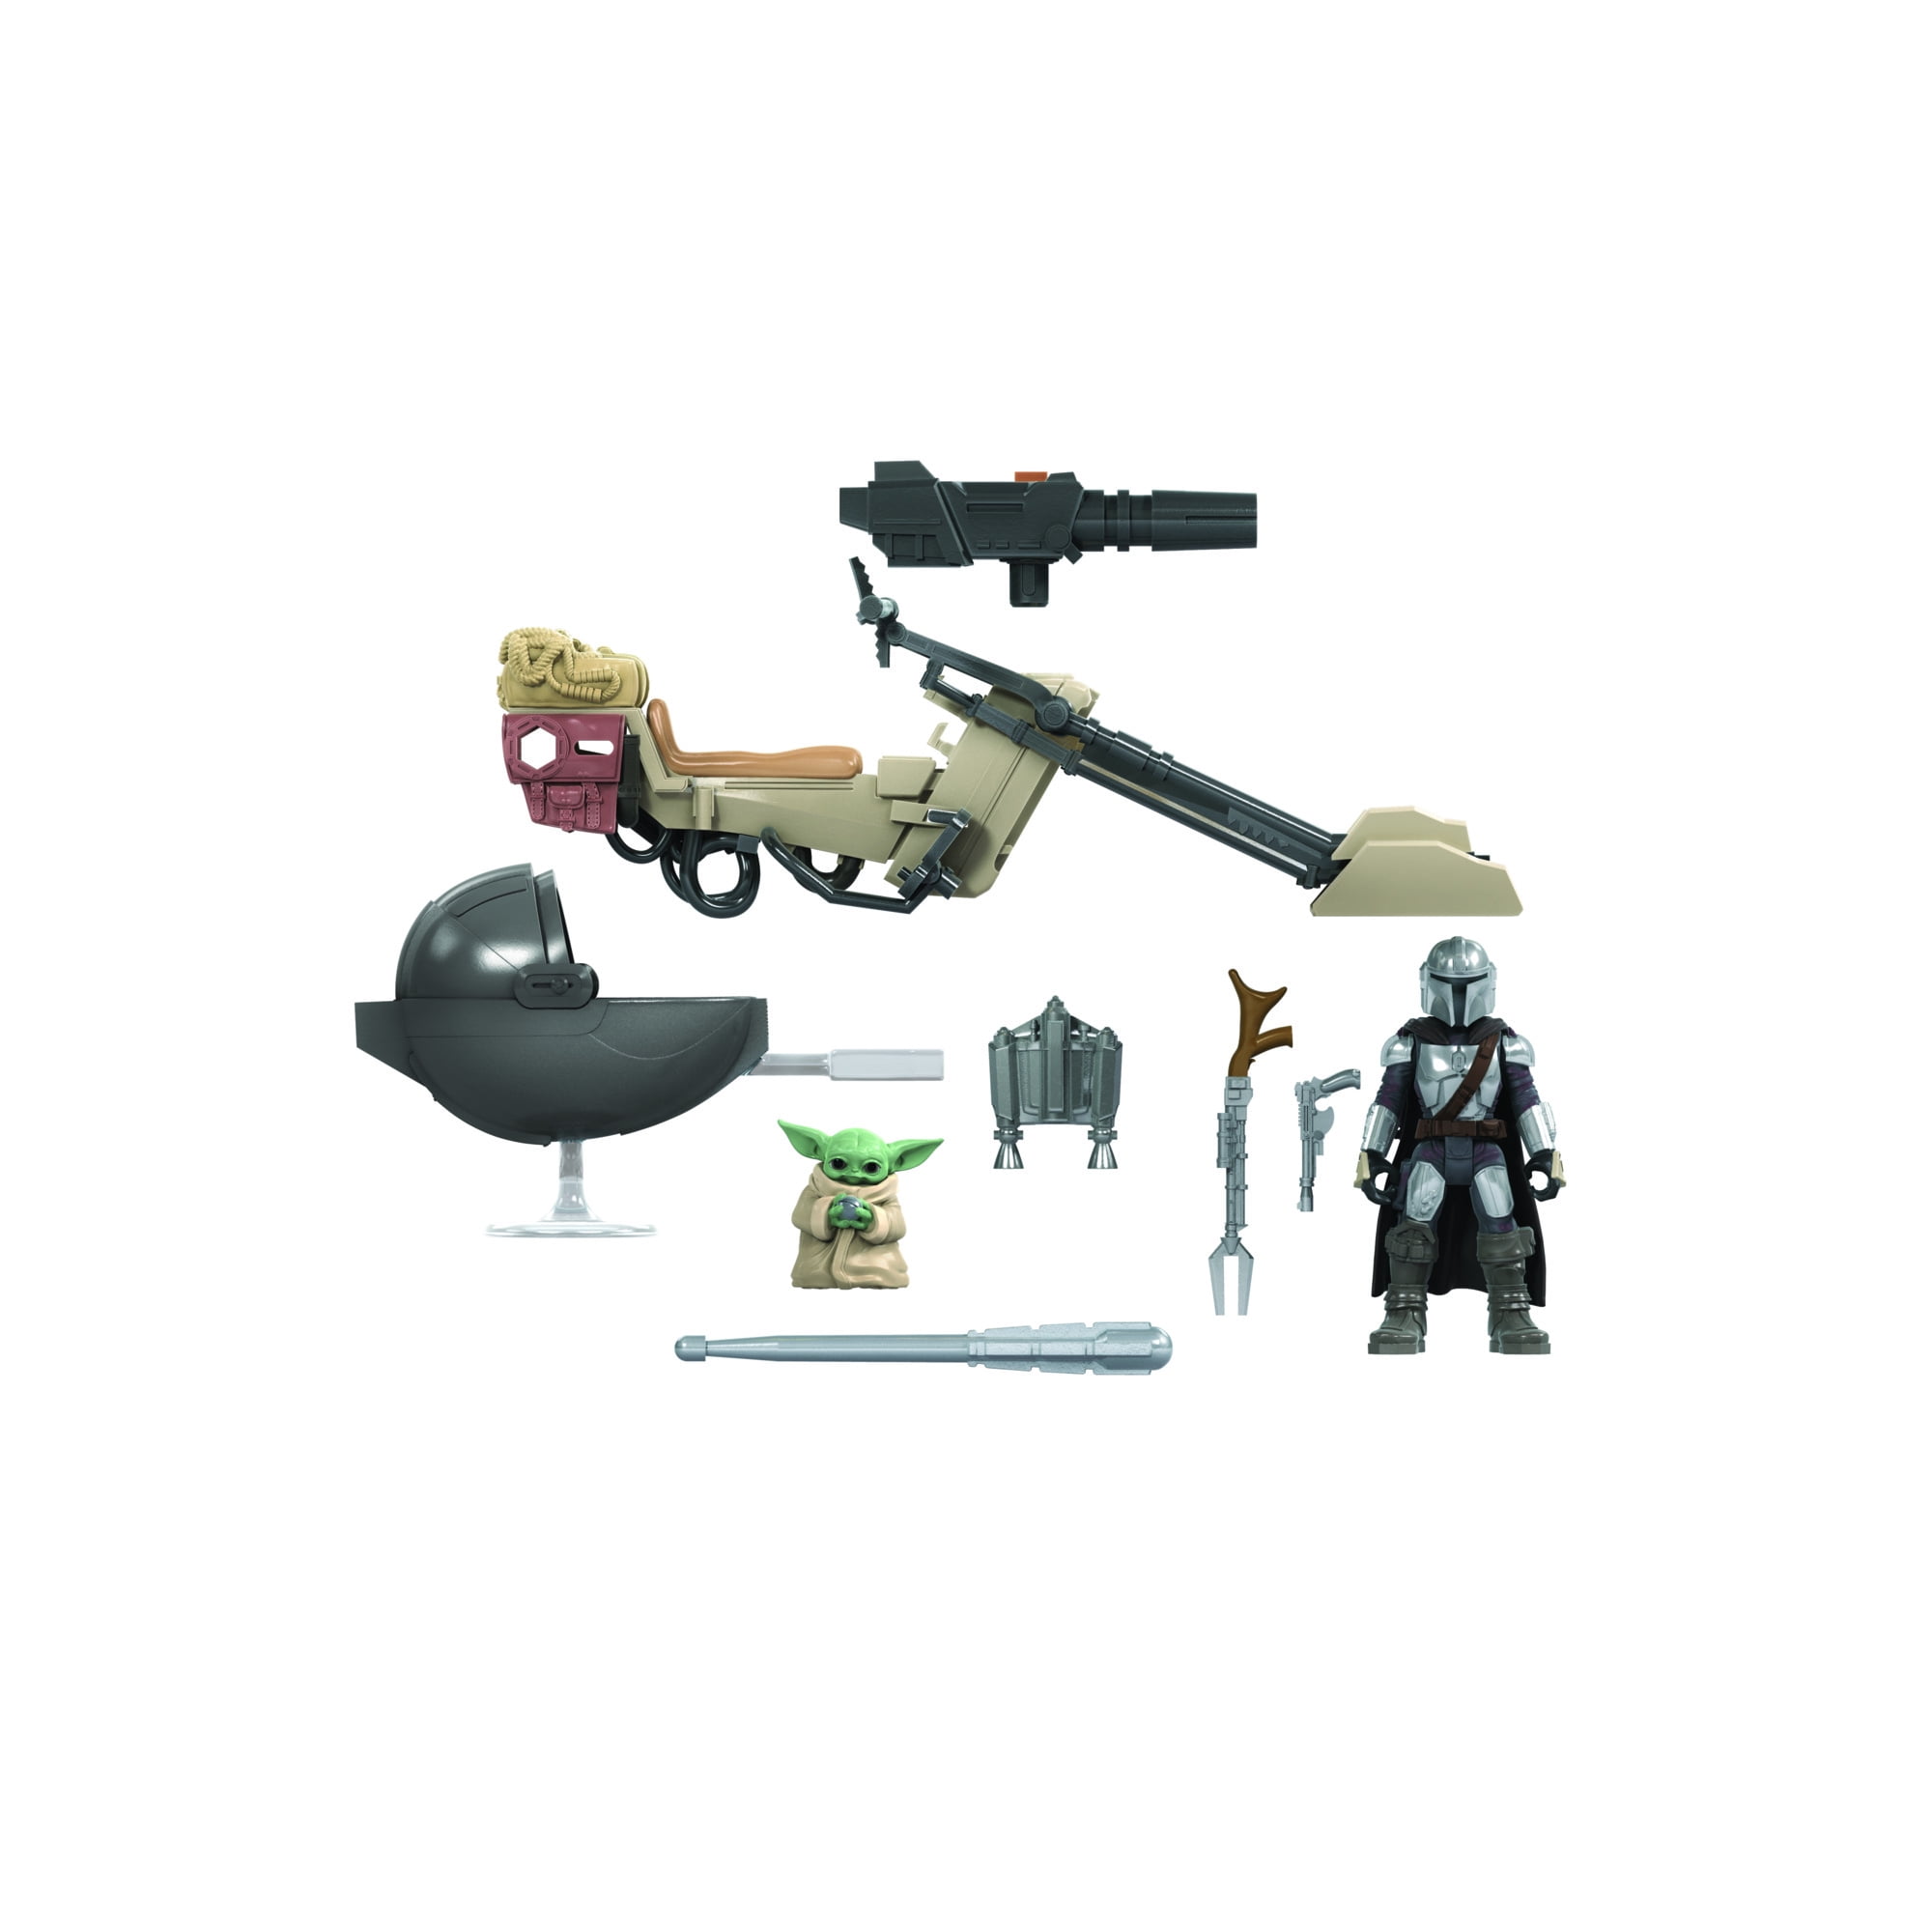 Star Wars Mission Fleet Mandalorian The Child Battle for the Bounty,  Includes 2 Figures